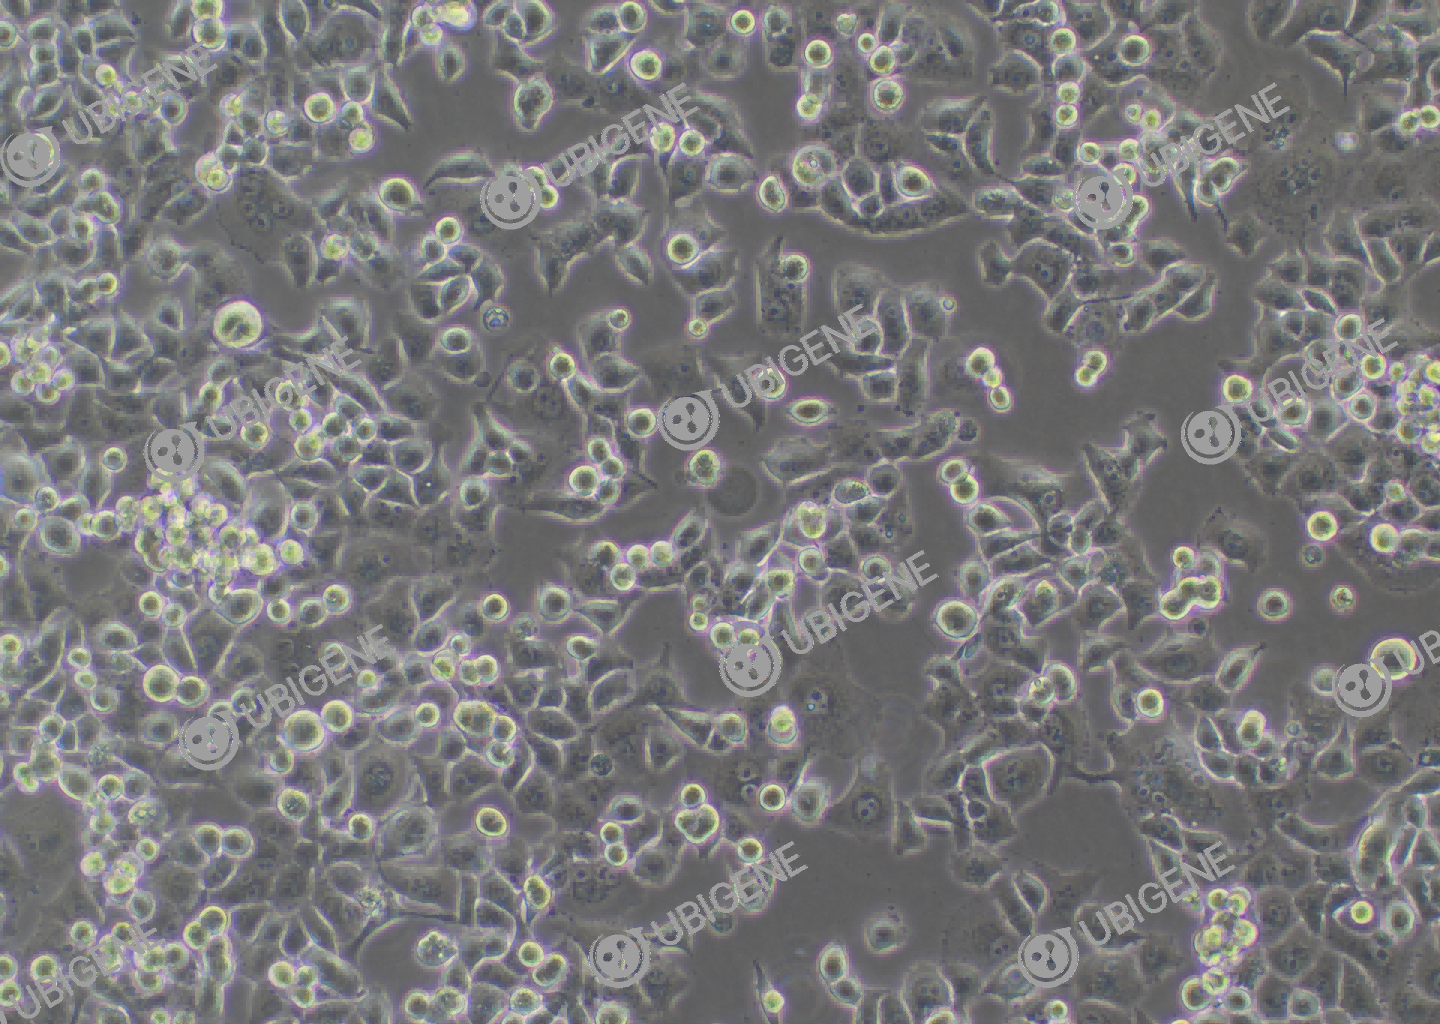 Panc-1 cell line Cultured cell morphology